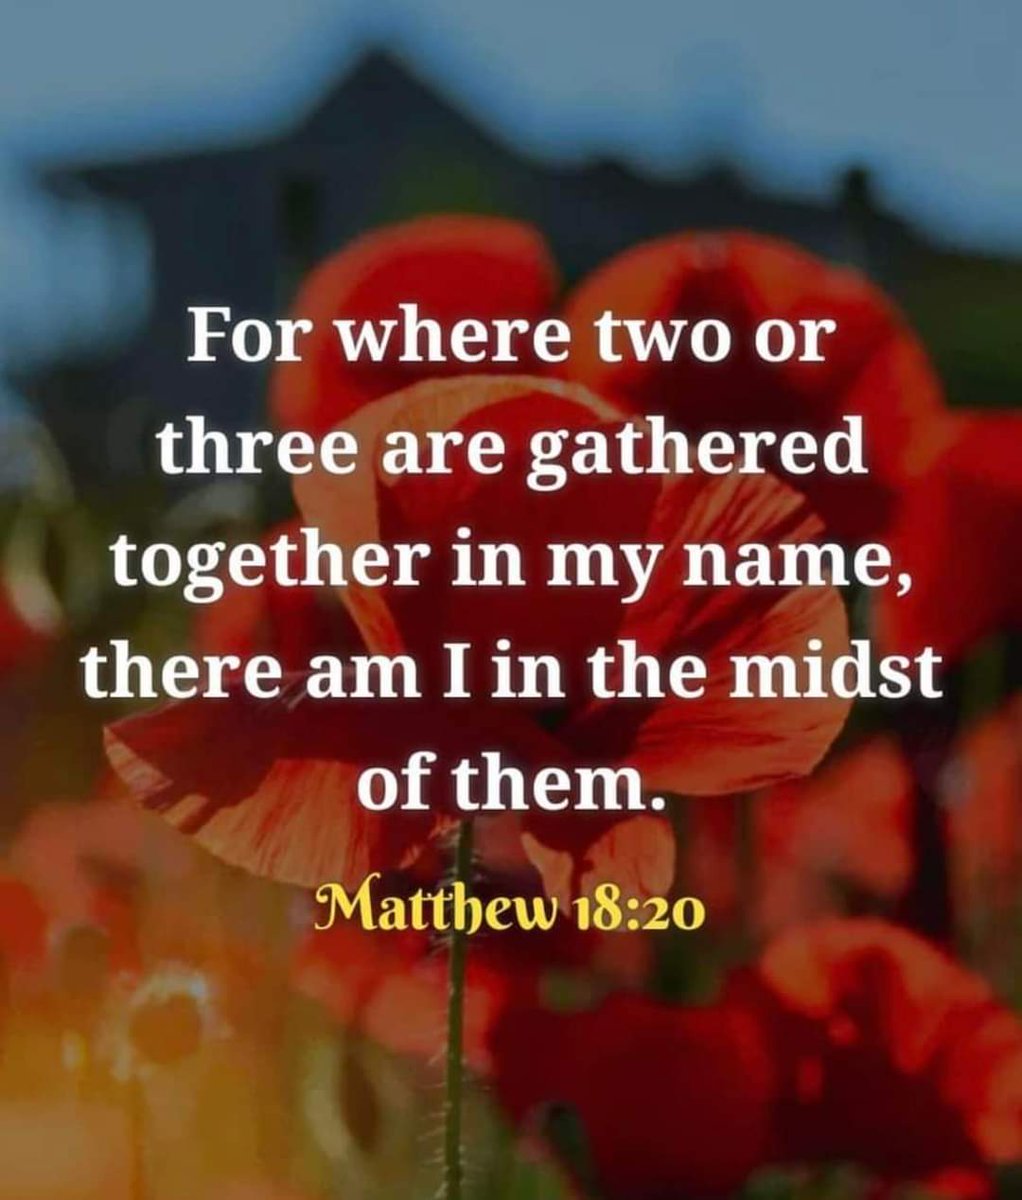 When we gather together in the name of the Lord Jesus Christ, He is in our midst.